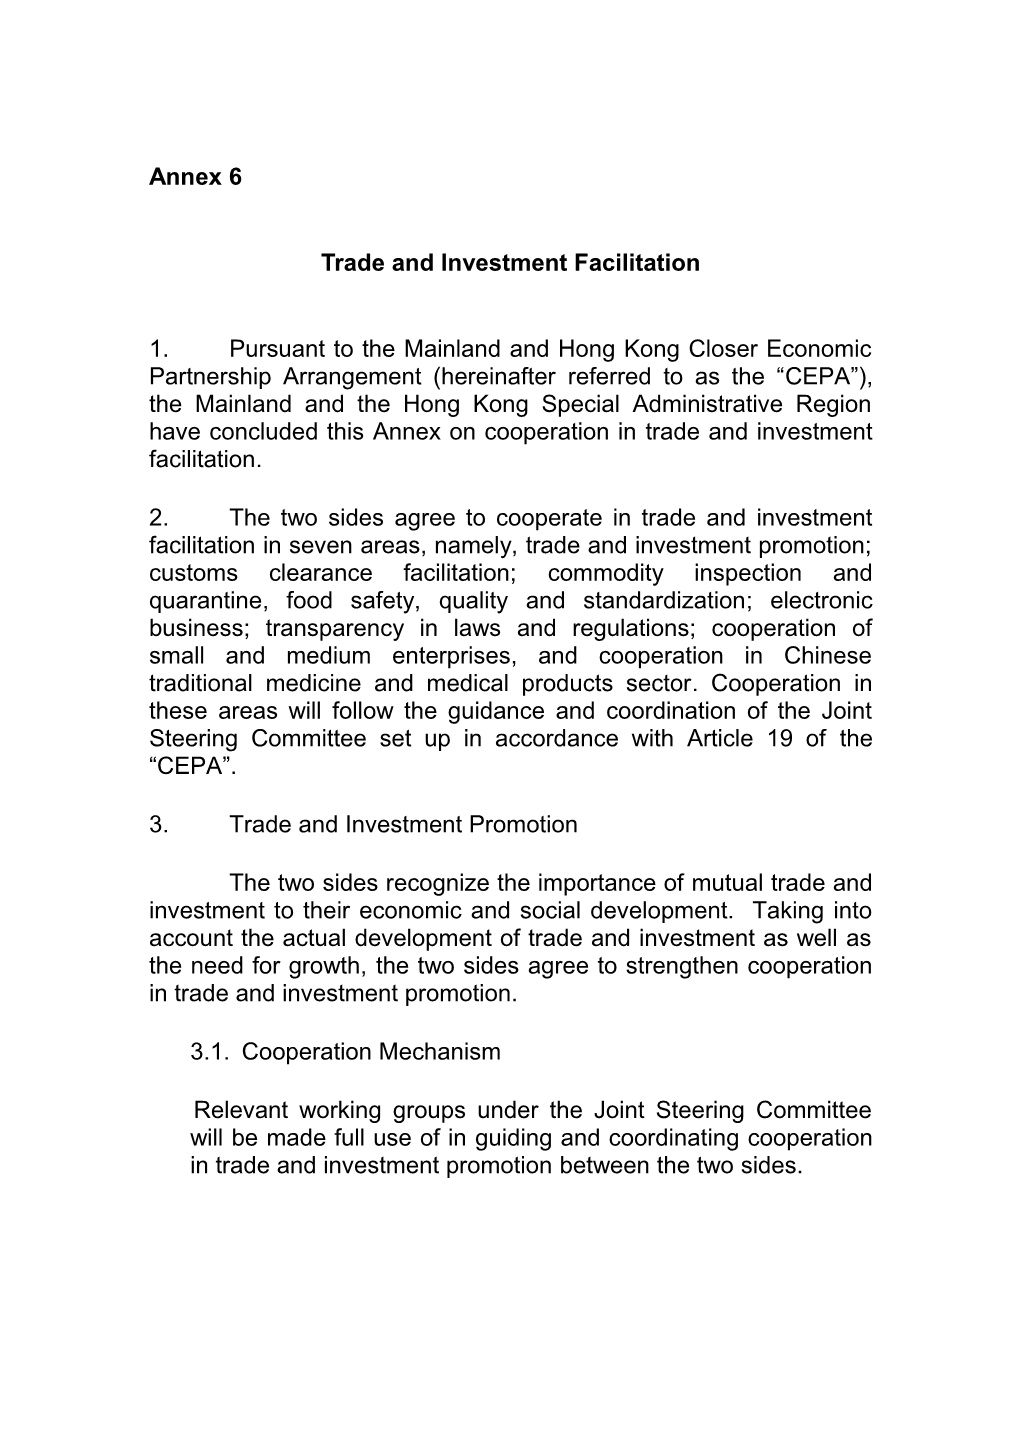 Trade and Investment Facilitation